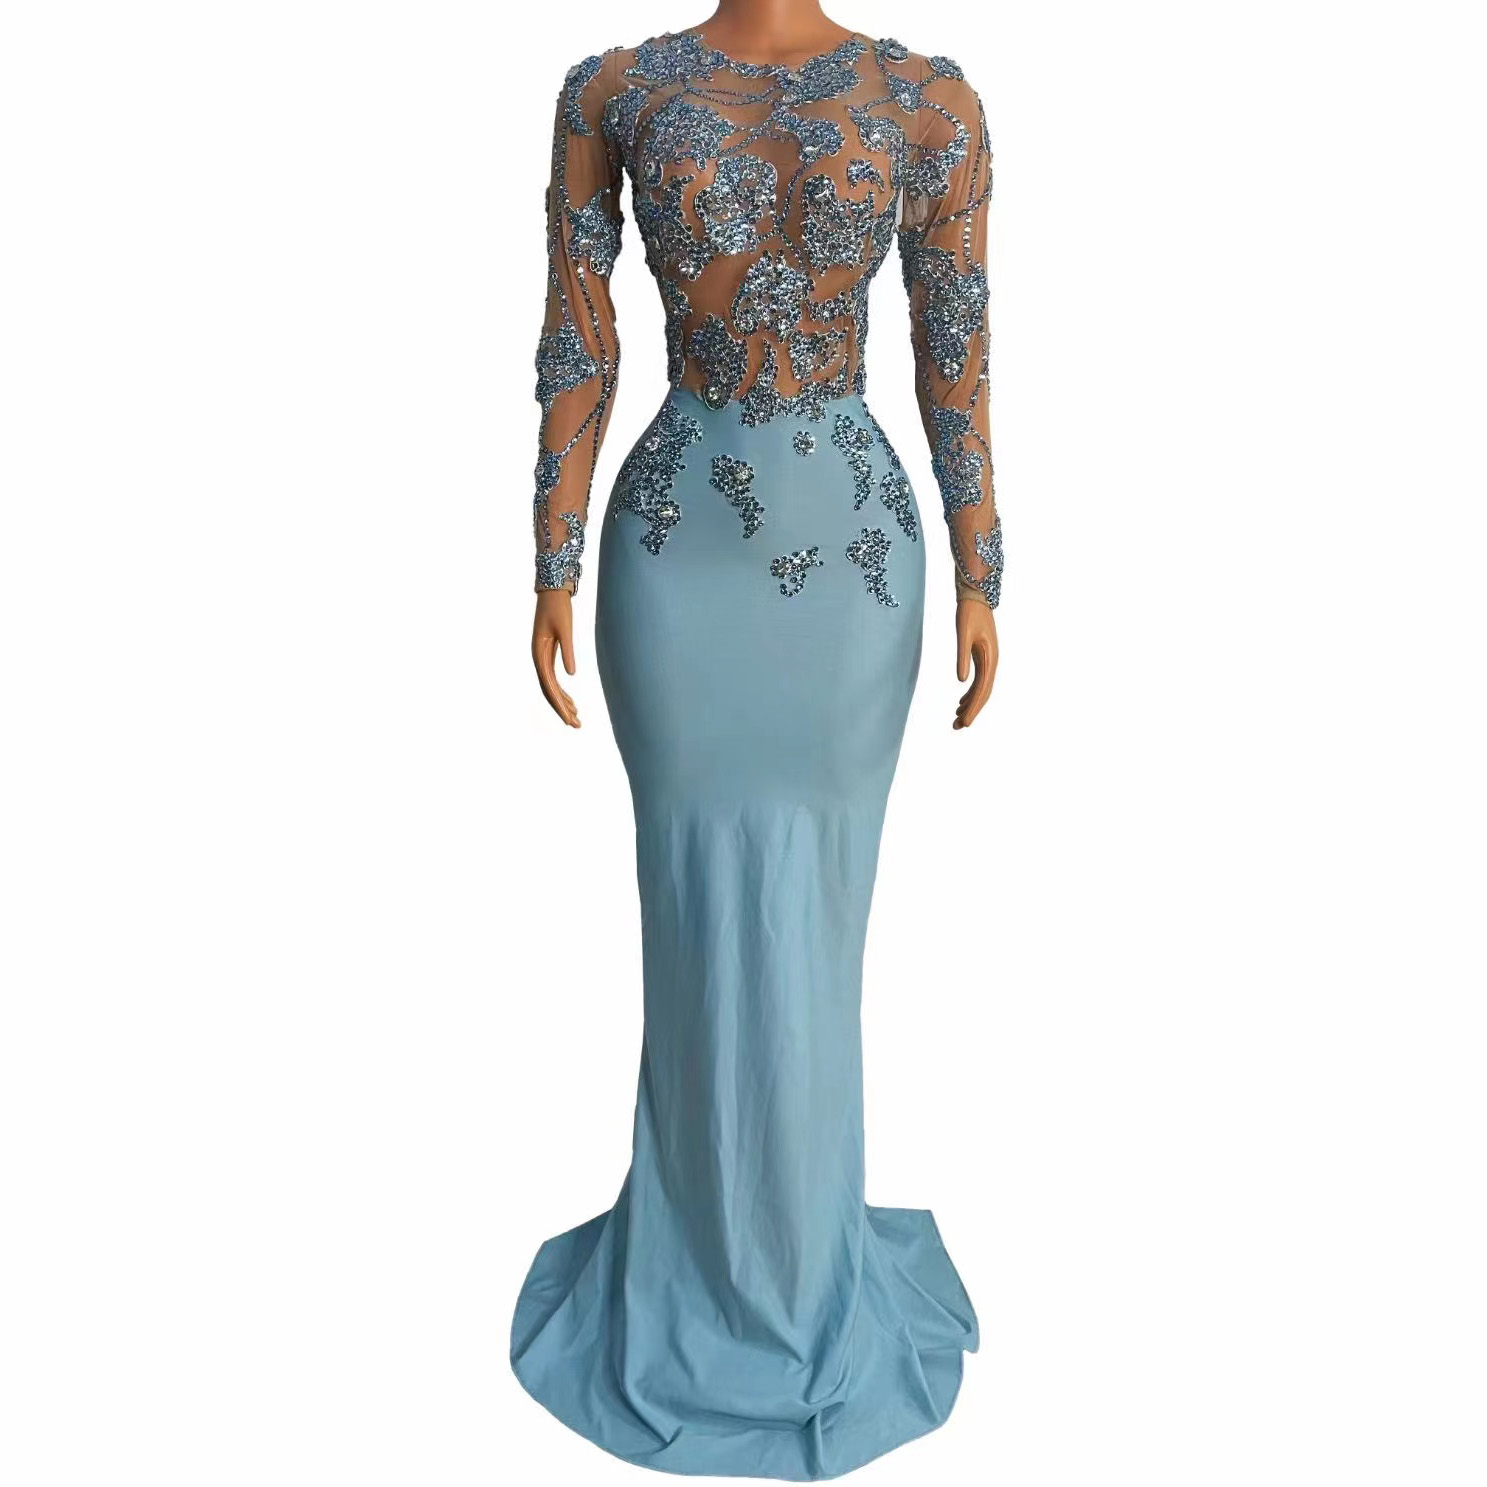 TAAFO Women Dress Style Blue Shiny Diamonds Tail Evening Gown Dress Wedding Dresses For Dinner Party